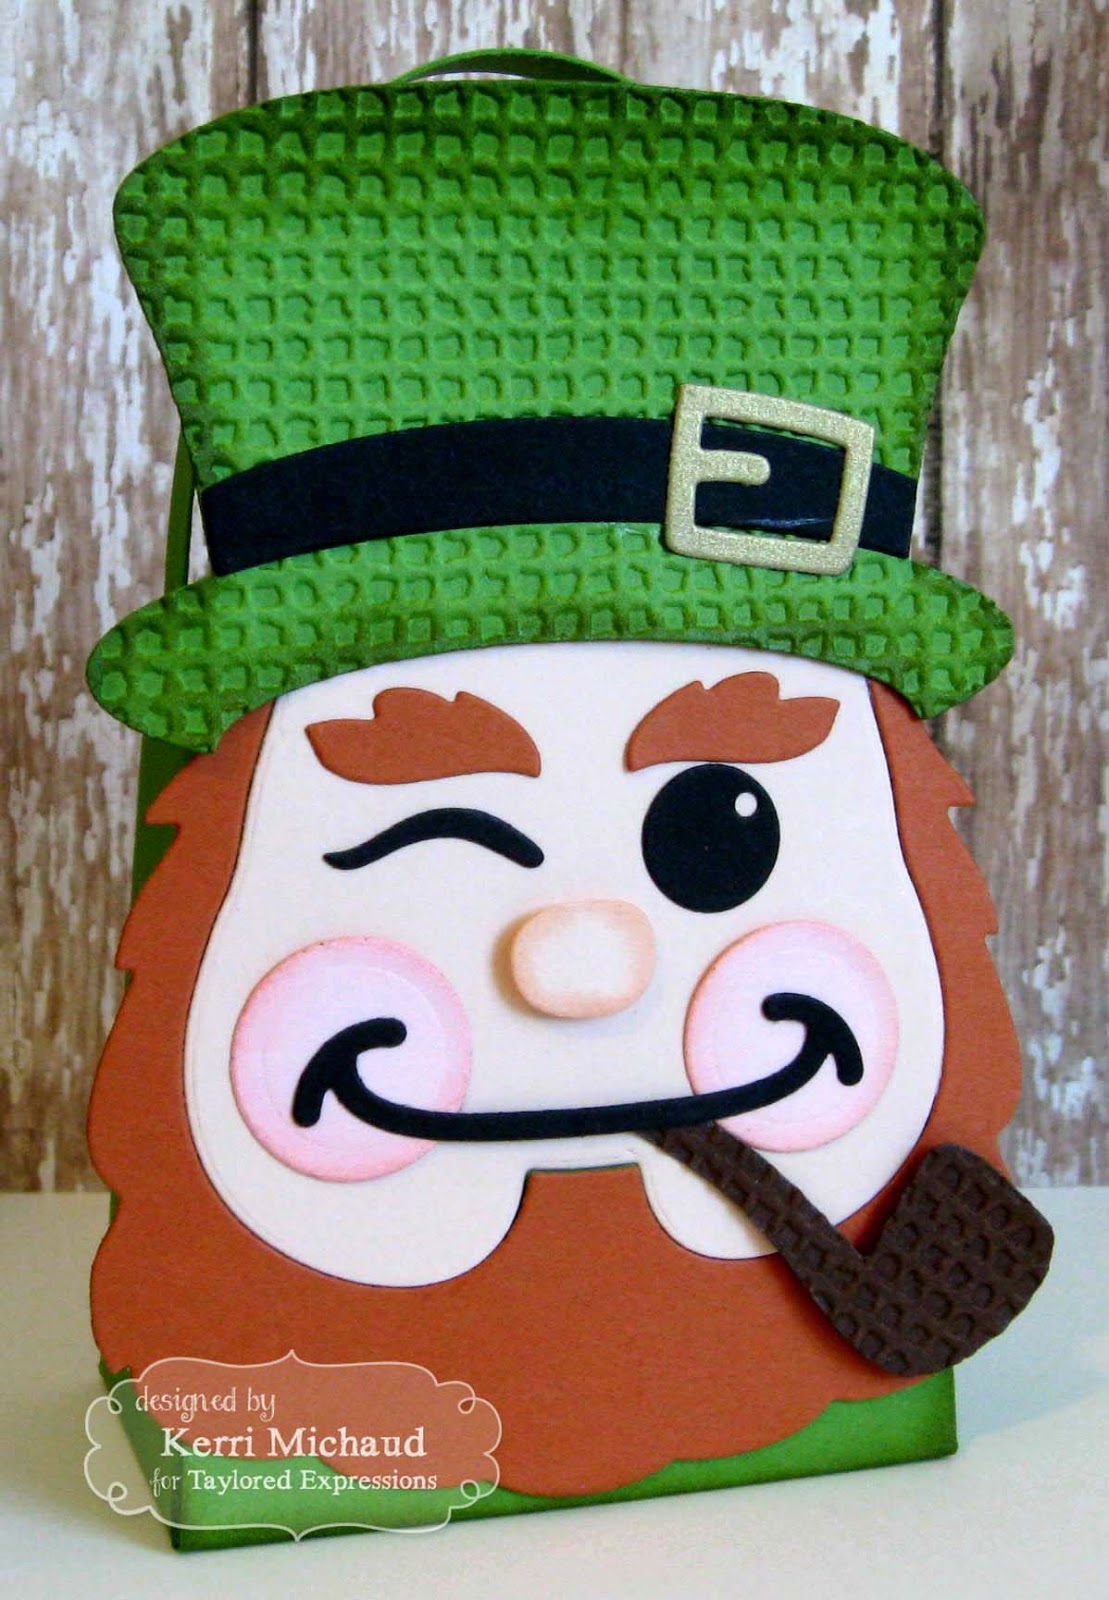 St. Patrick's Day Taylored Expressions Gift Set! - Cards by Kerri